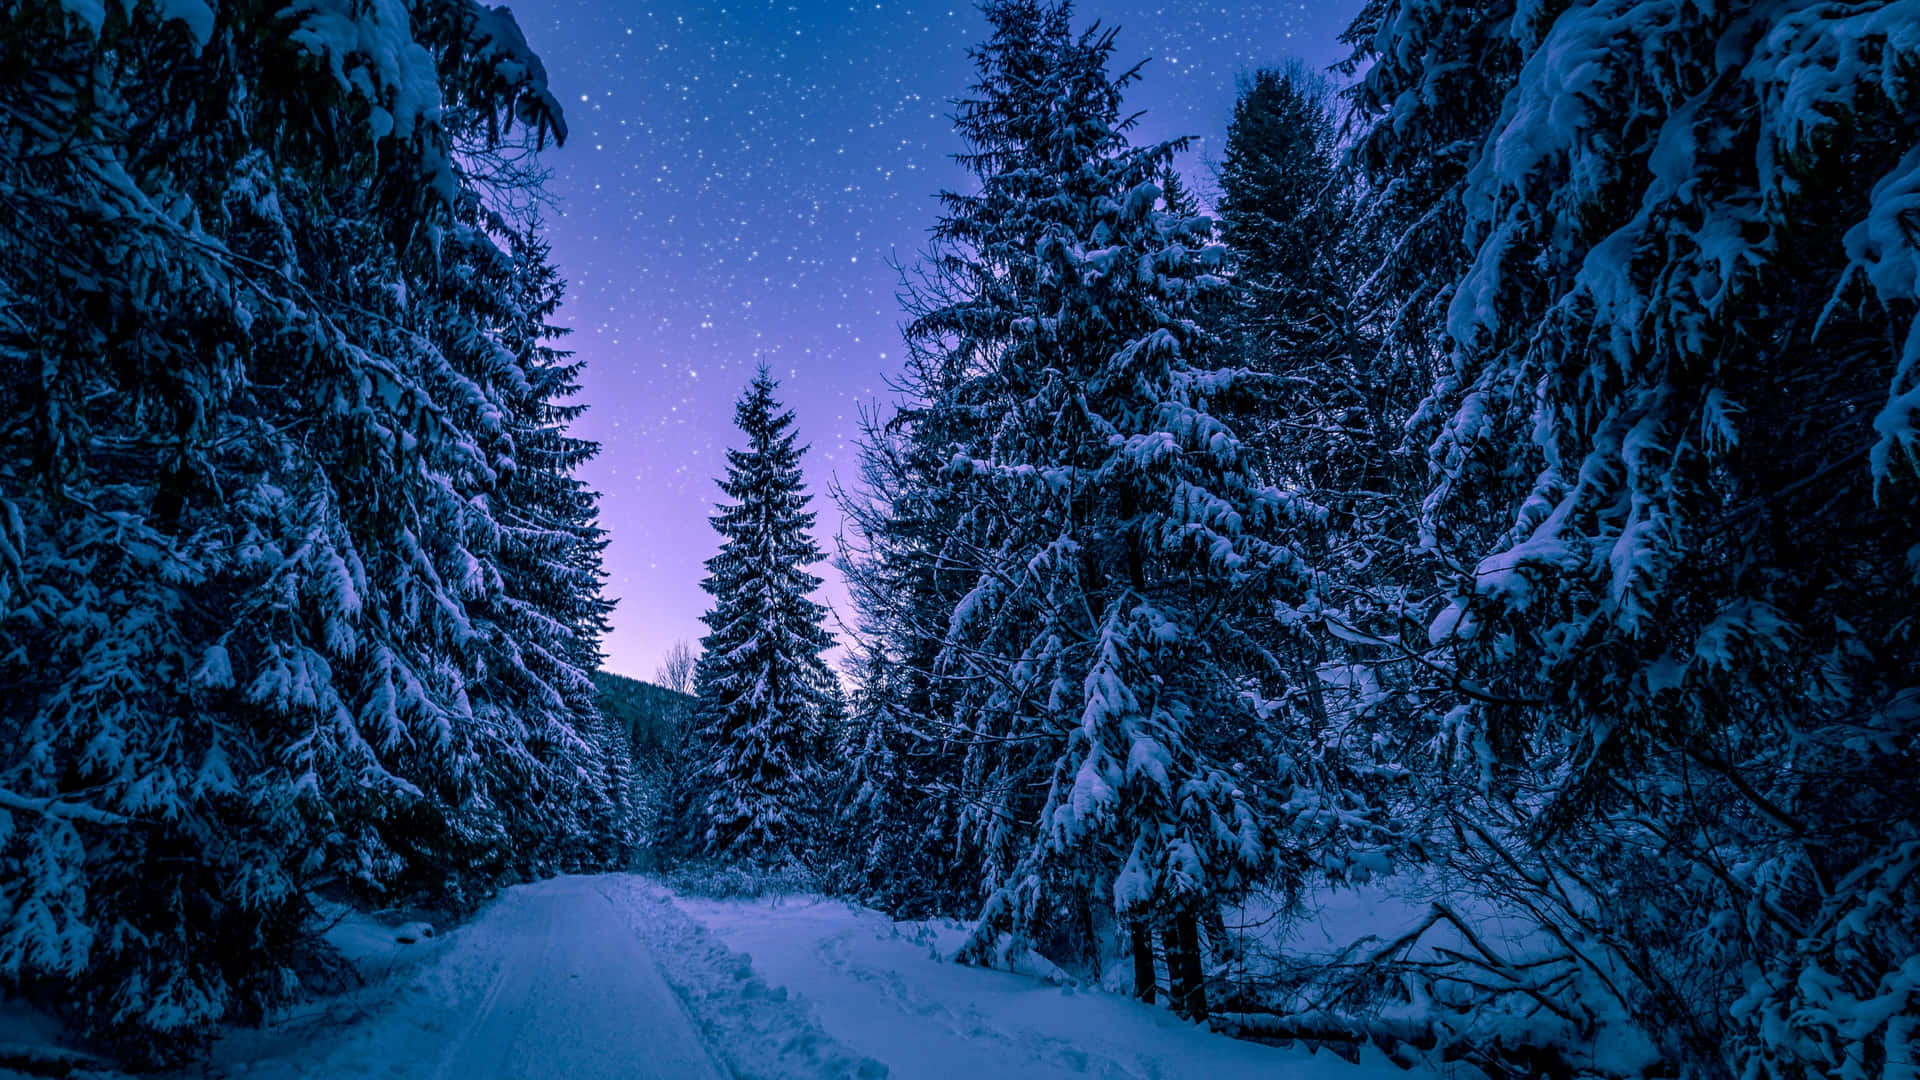 A magical winter forest amidst a snow-covered landscape